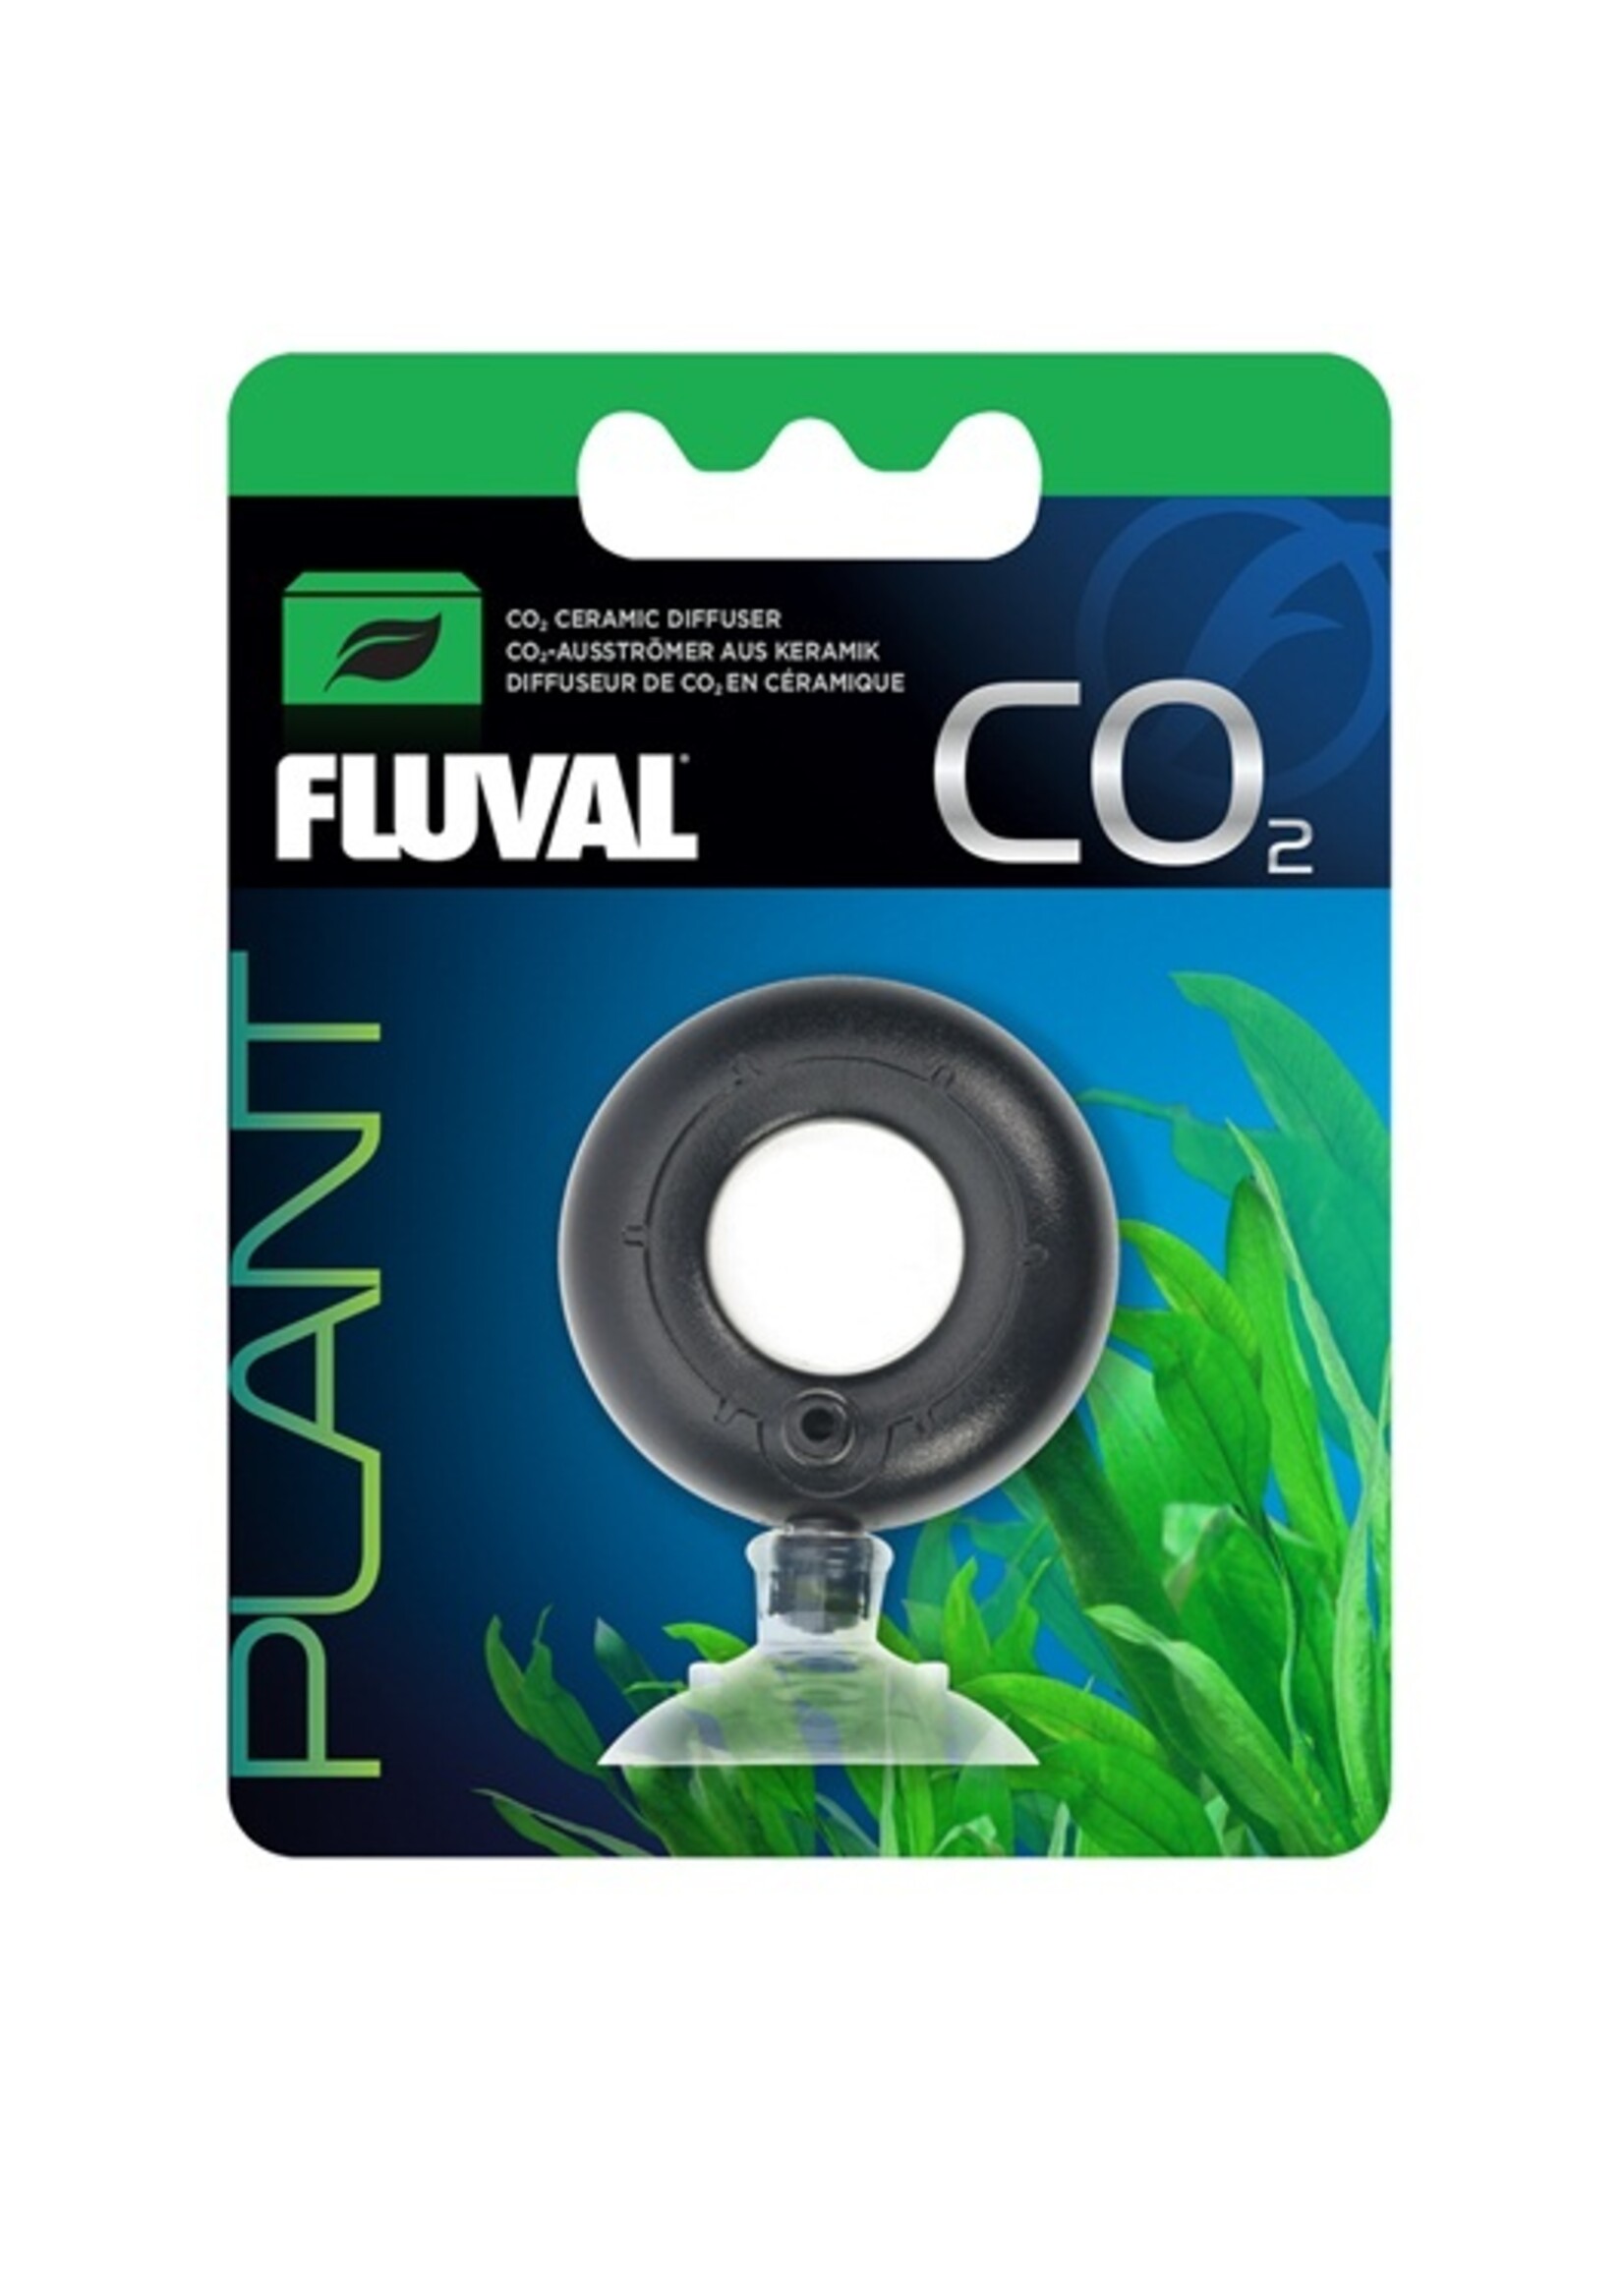 Fluval Fluval Ceramic CO2 Diffuser w/ Suction Cup